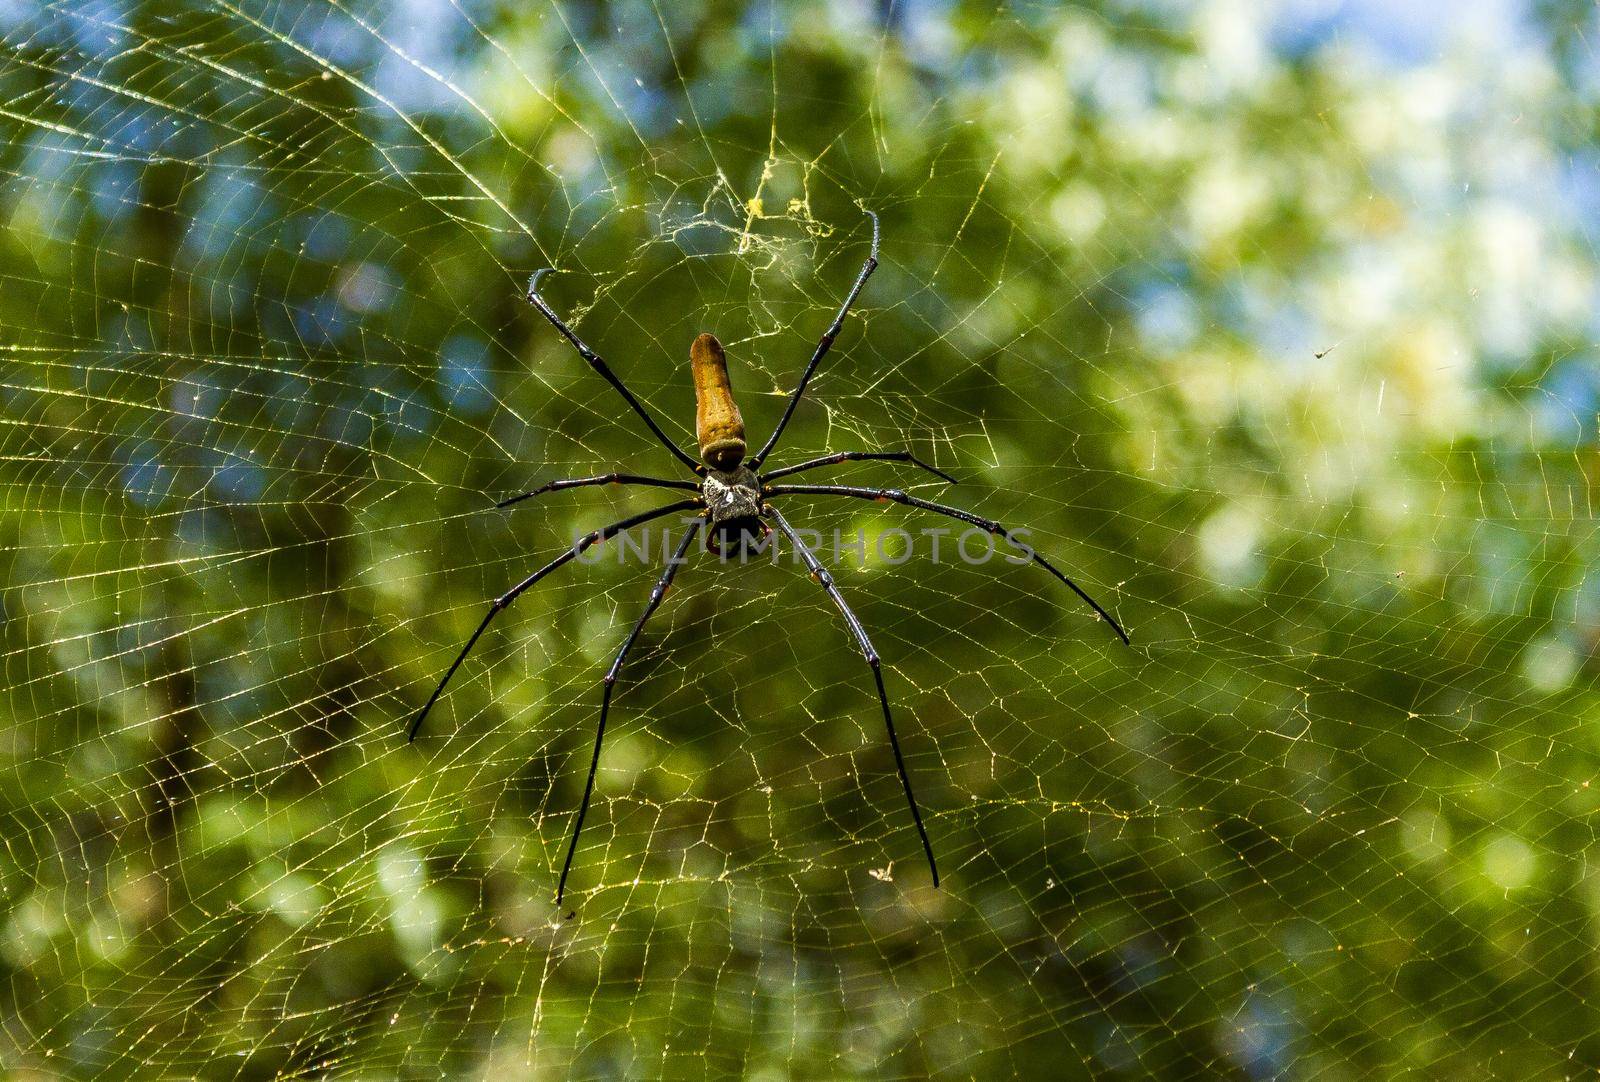 A large northern golden orb weaver or giant golden orb weaver spider Nephila pilipes typically found in Asia and Australia. It is a species of spider known for spinning intricate and beautiful web.